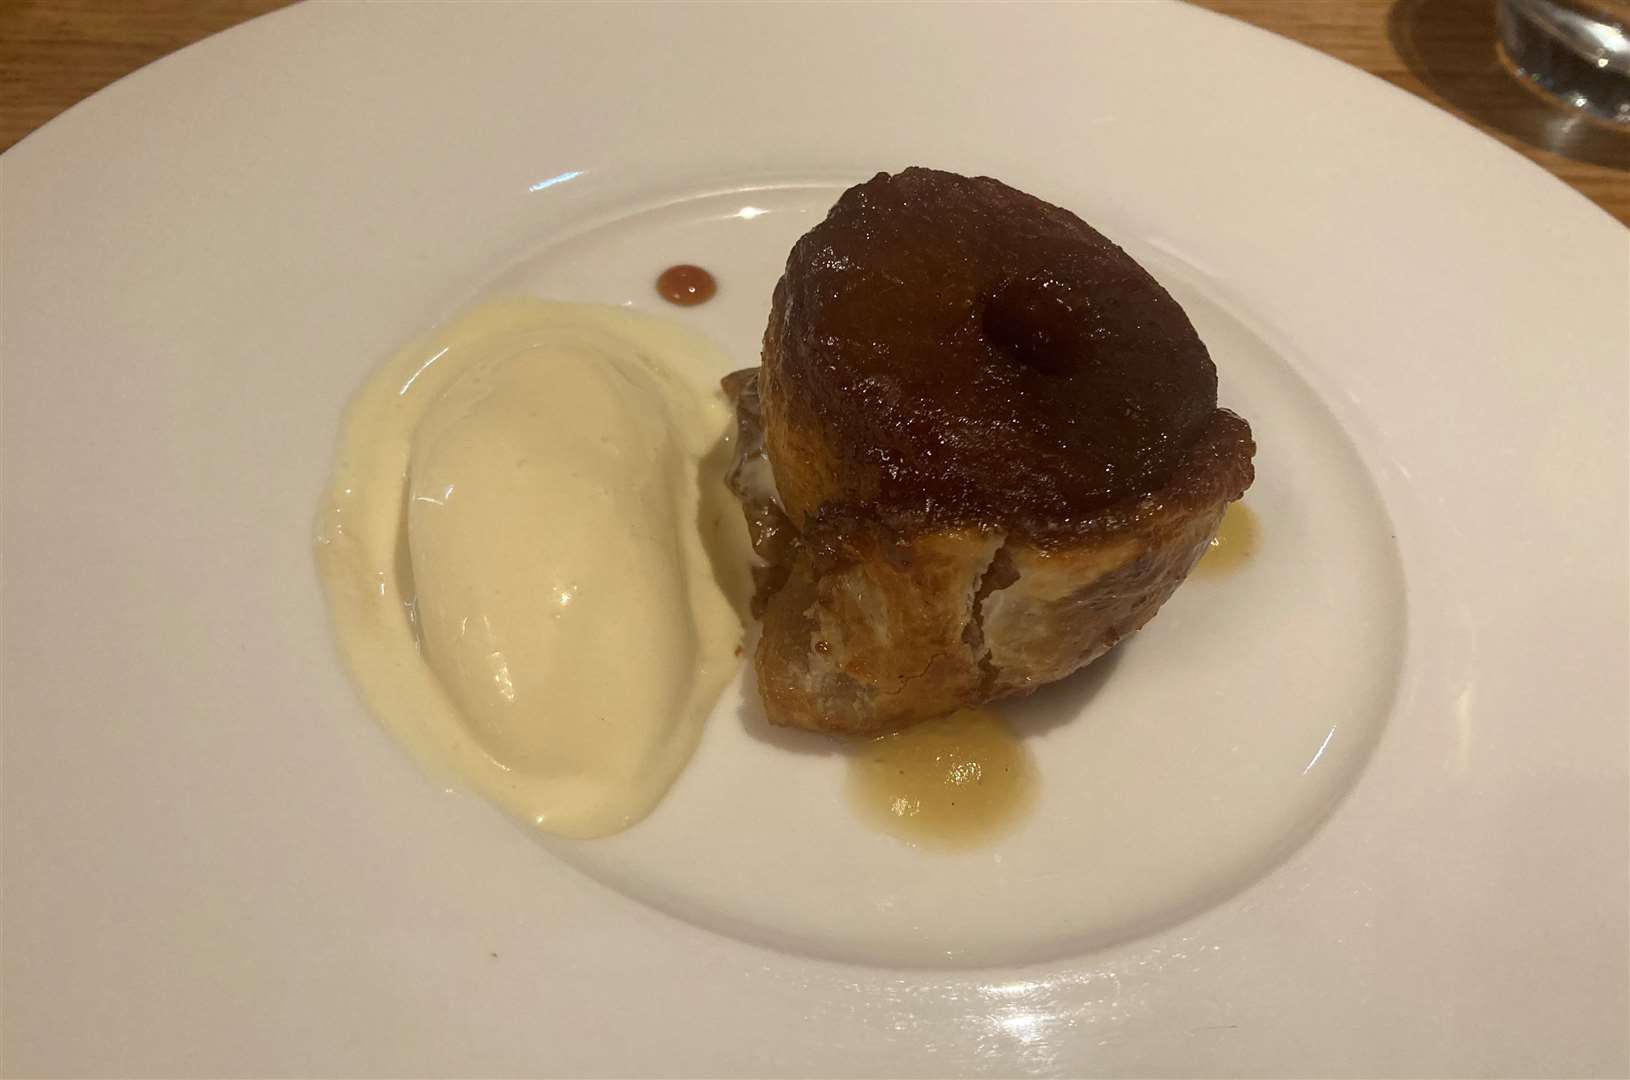 The exceptional apple tartan, hazel and walnut praline with bay leaf ice cream. Picture: Kev Hurst